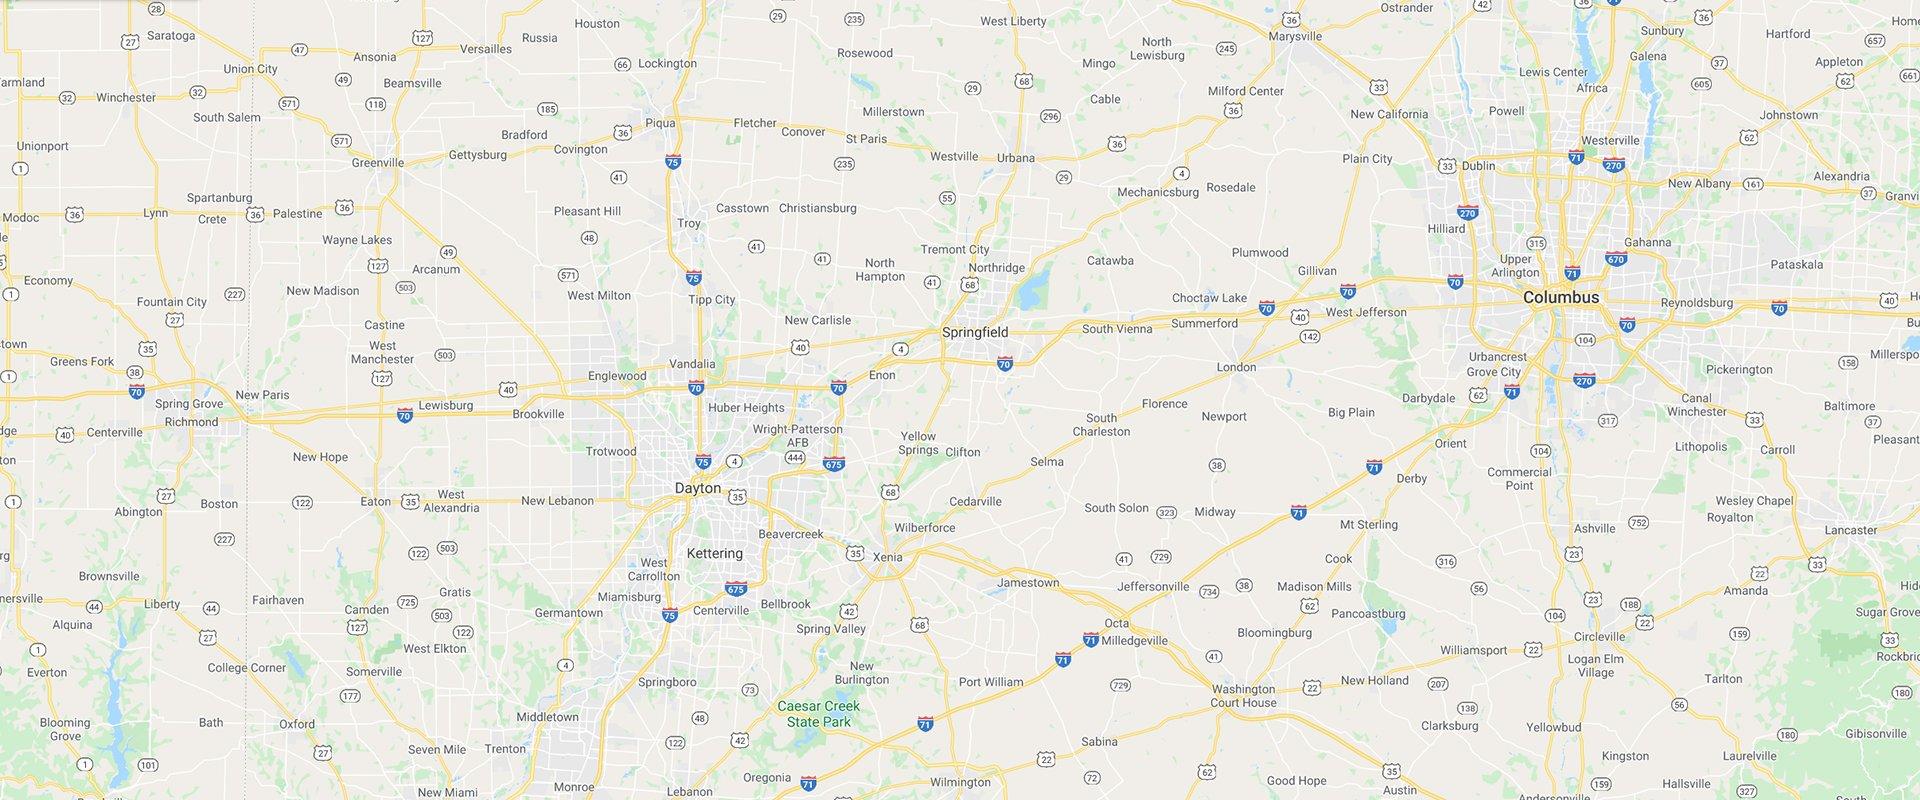 map of columbus, springfield, and dayton areas